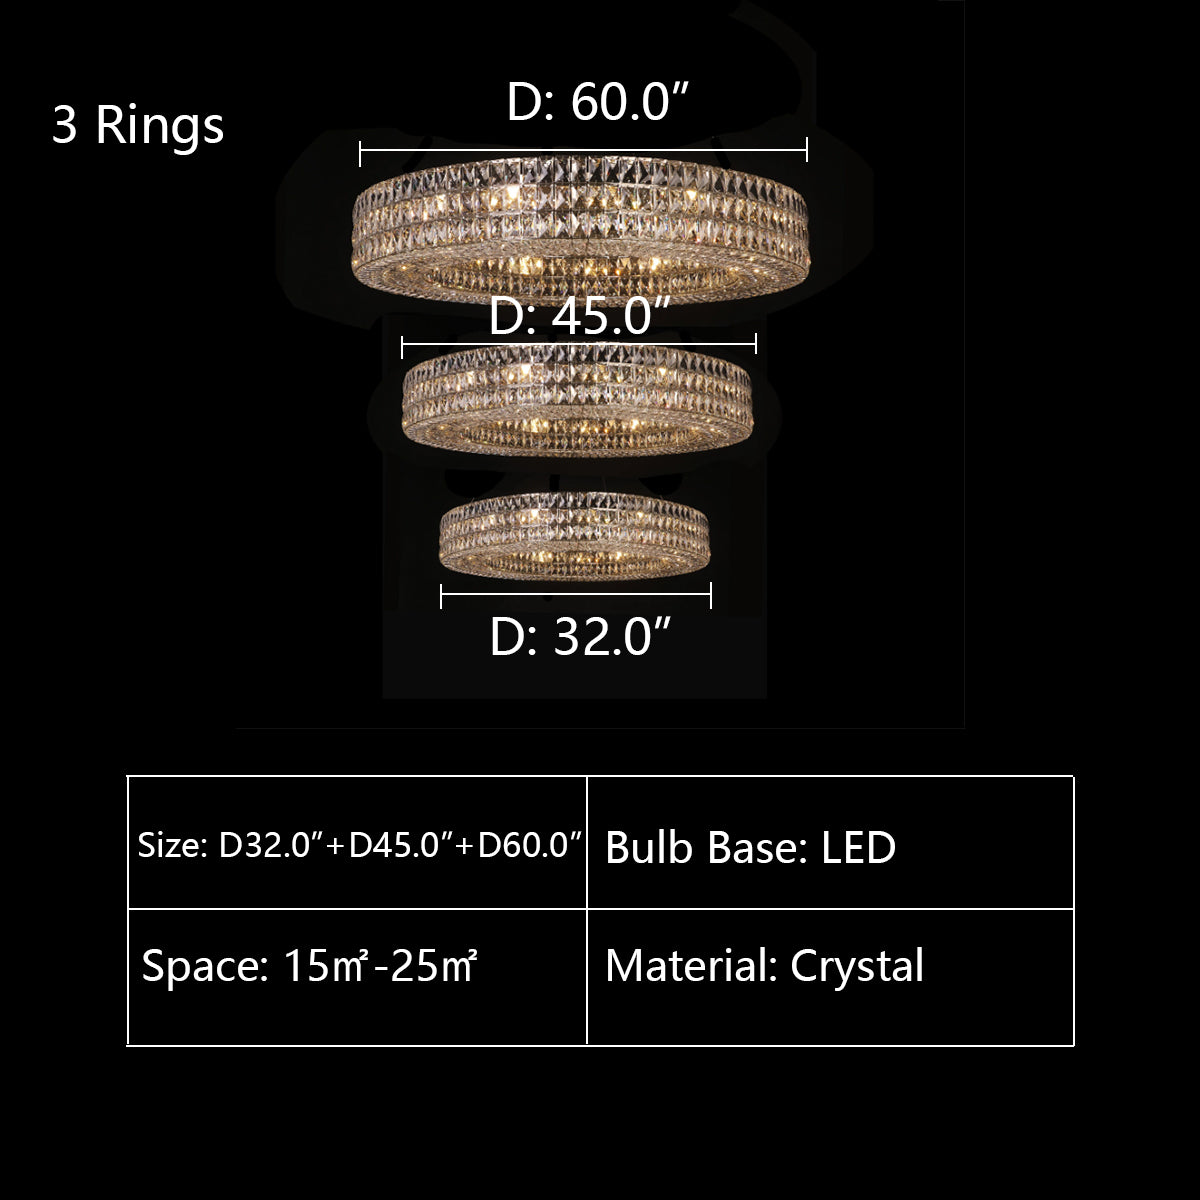 3Rings: D60.0" D45.0" D32.0" chandelier,chandeliers,crystal,rings,round,multi-tier,tiers,layers,ceiling,living room,high-ceiling room,foyer,3 rings,2rings,extra large,large,oversized,huge,big,long,high